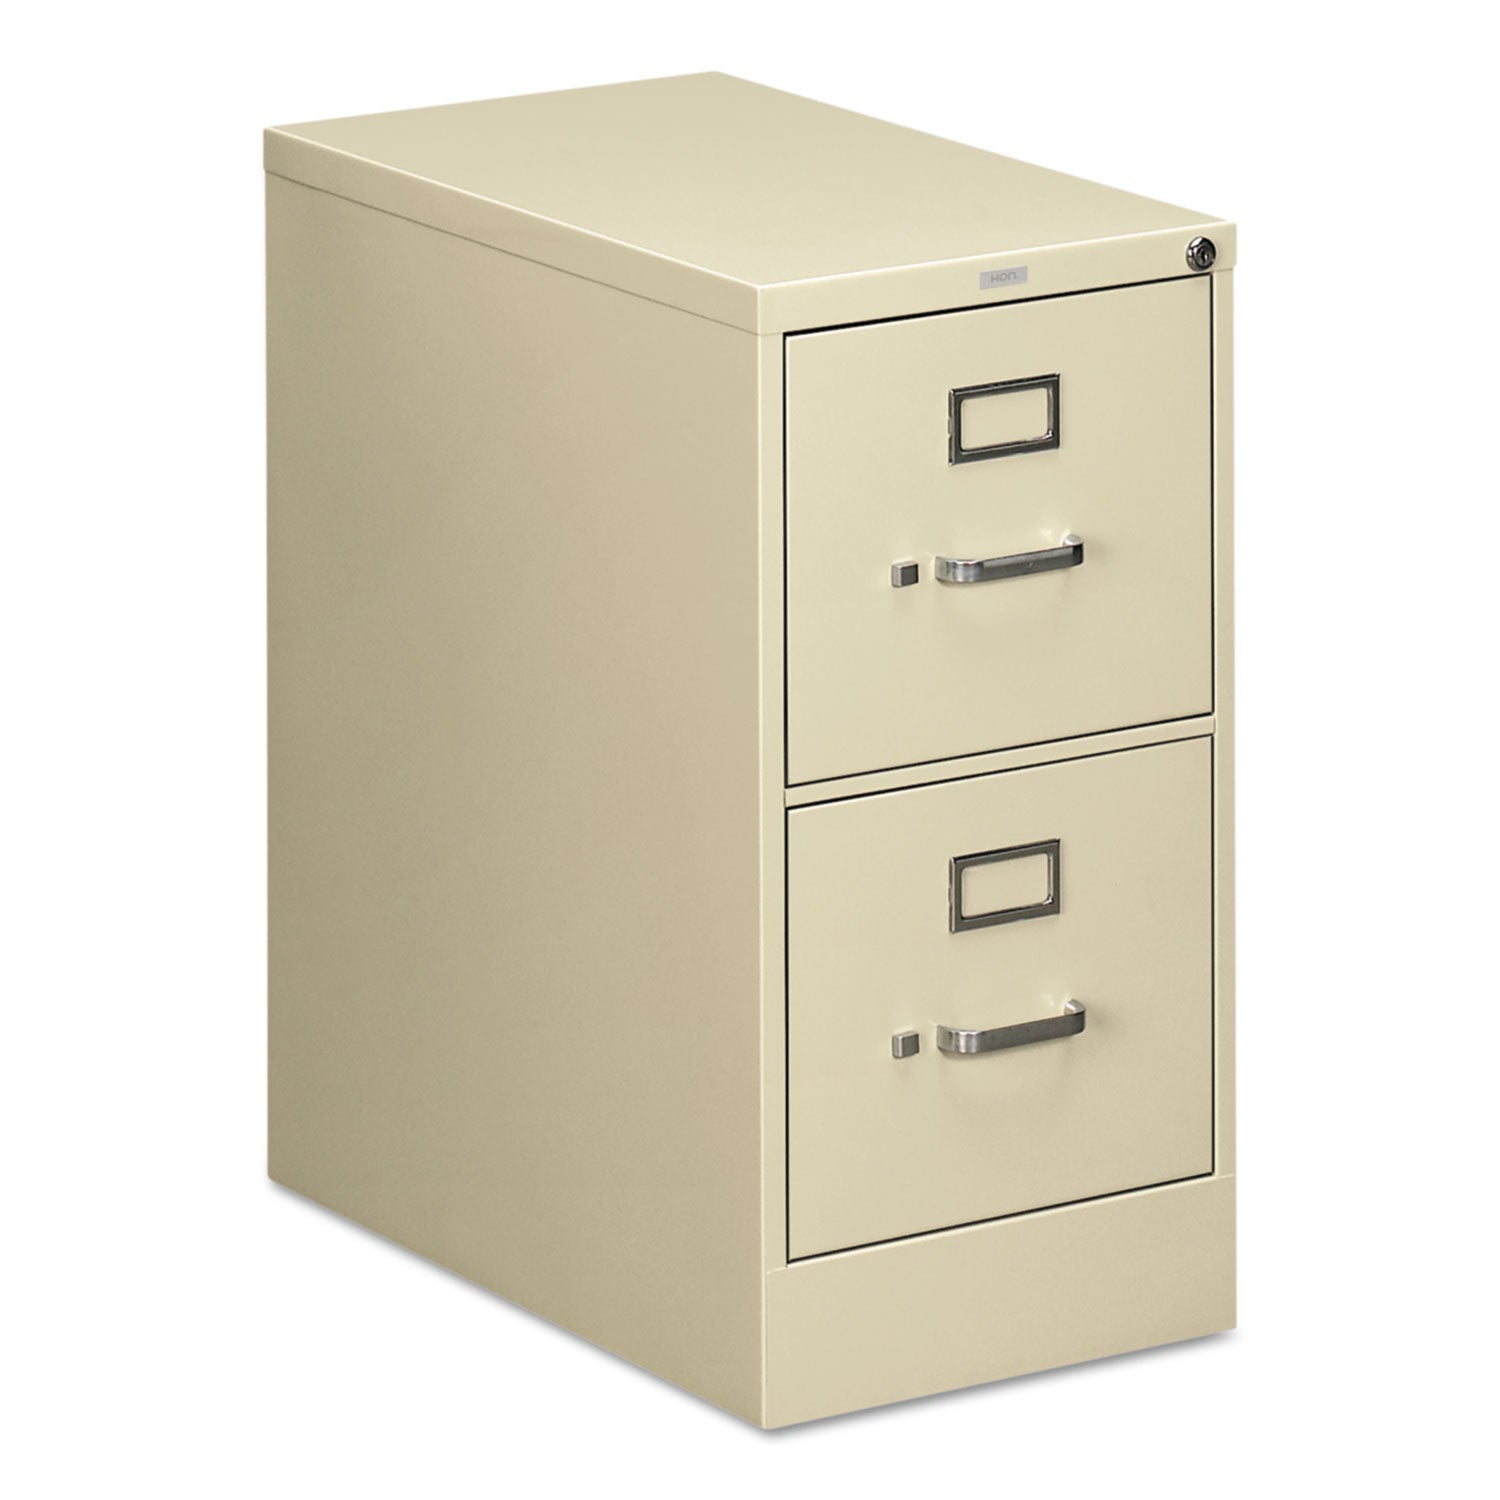 510 Series Vertical File, 2 Letter-Size File Drawers, Putty, 15" x 25" x 29 - 